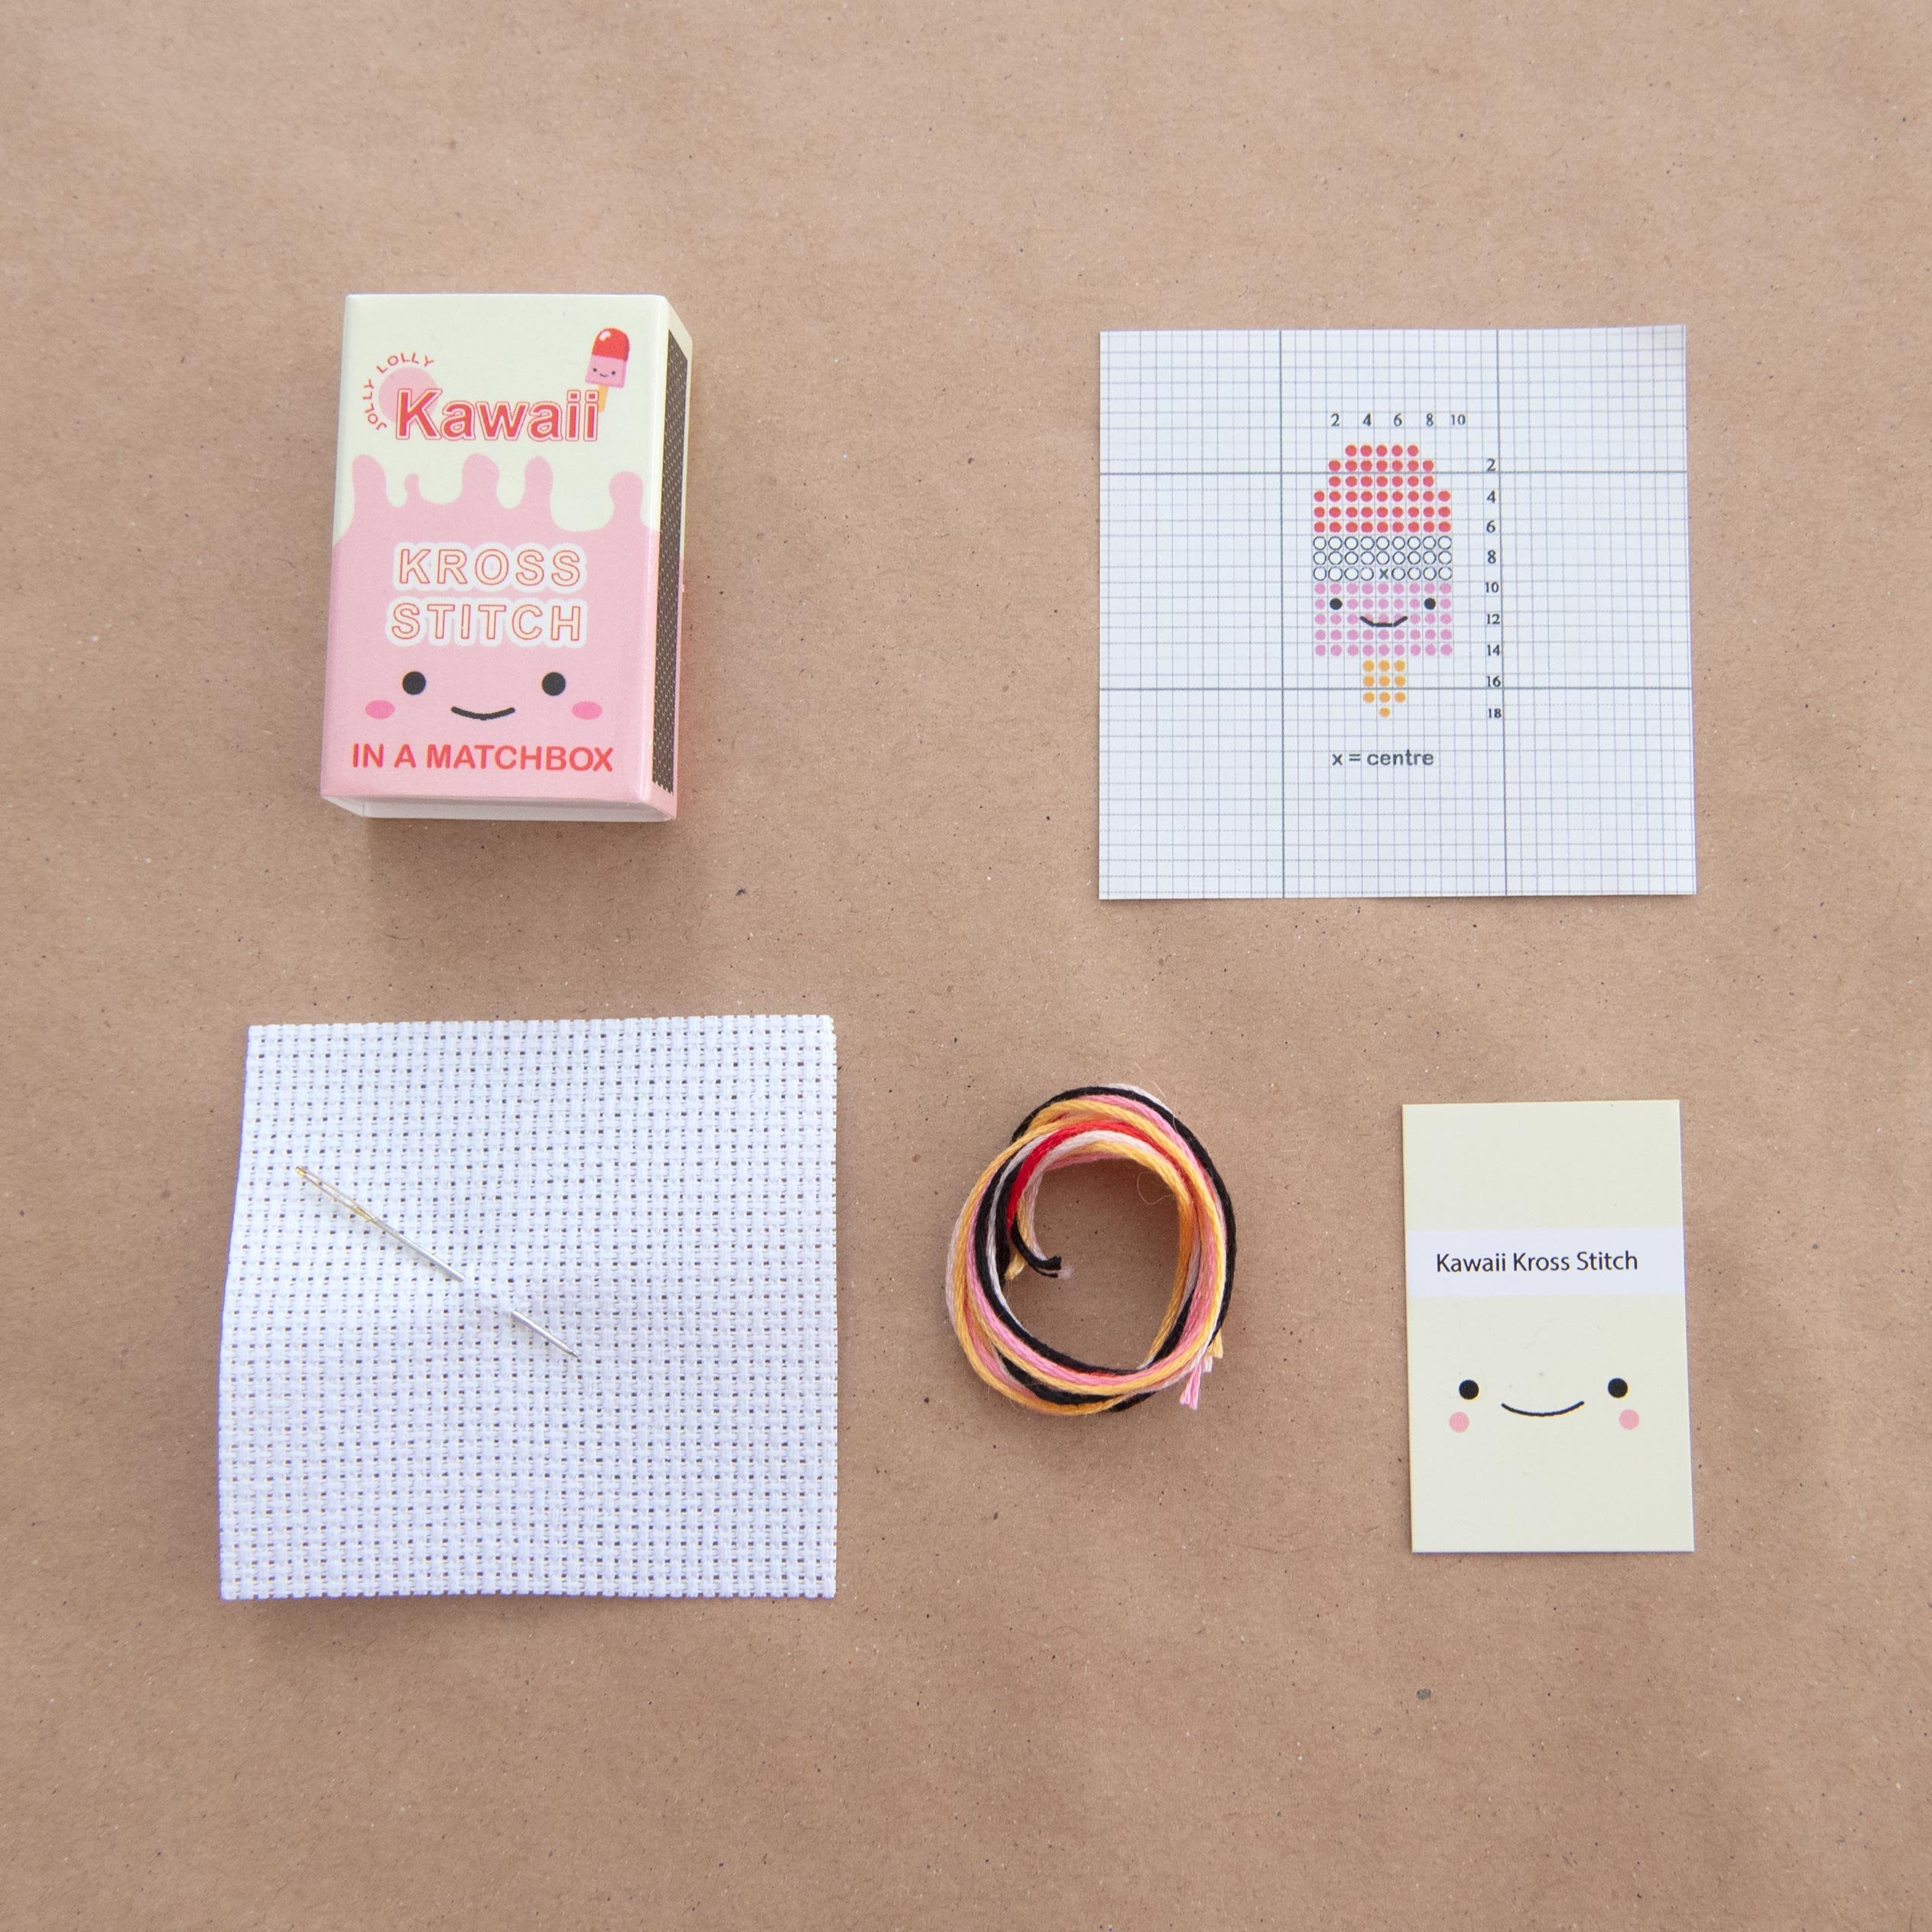 Mini Cross Stitch Kit With Kawaii Ice Lolly In A Matchbox